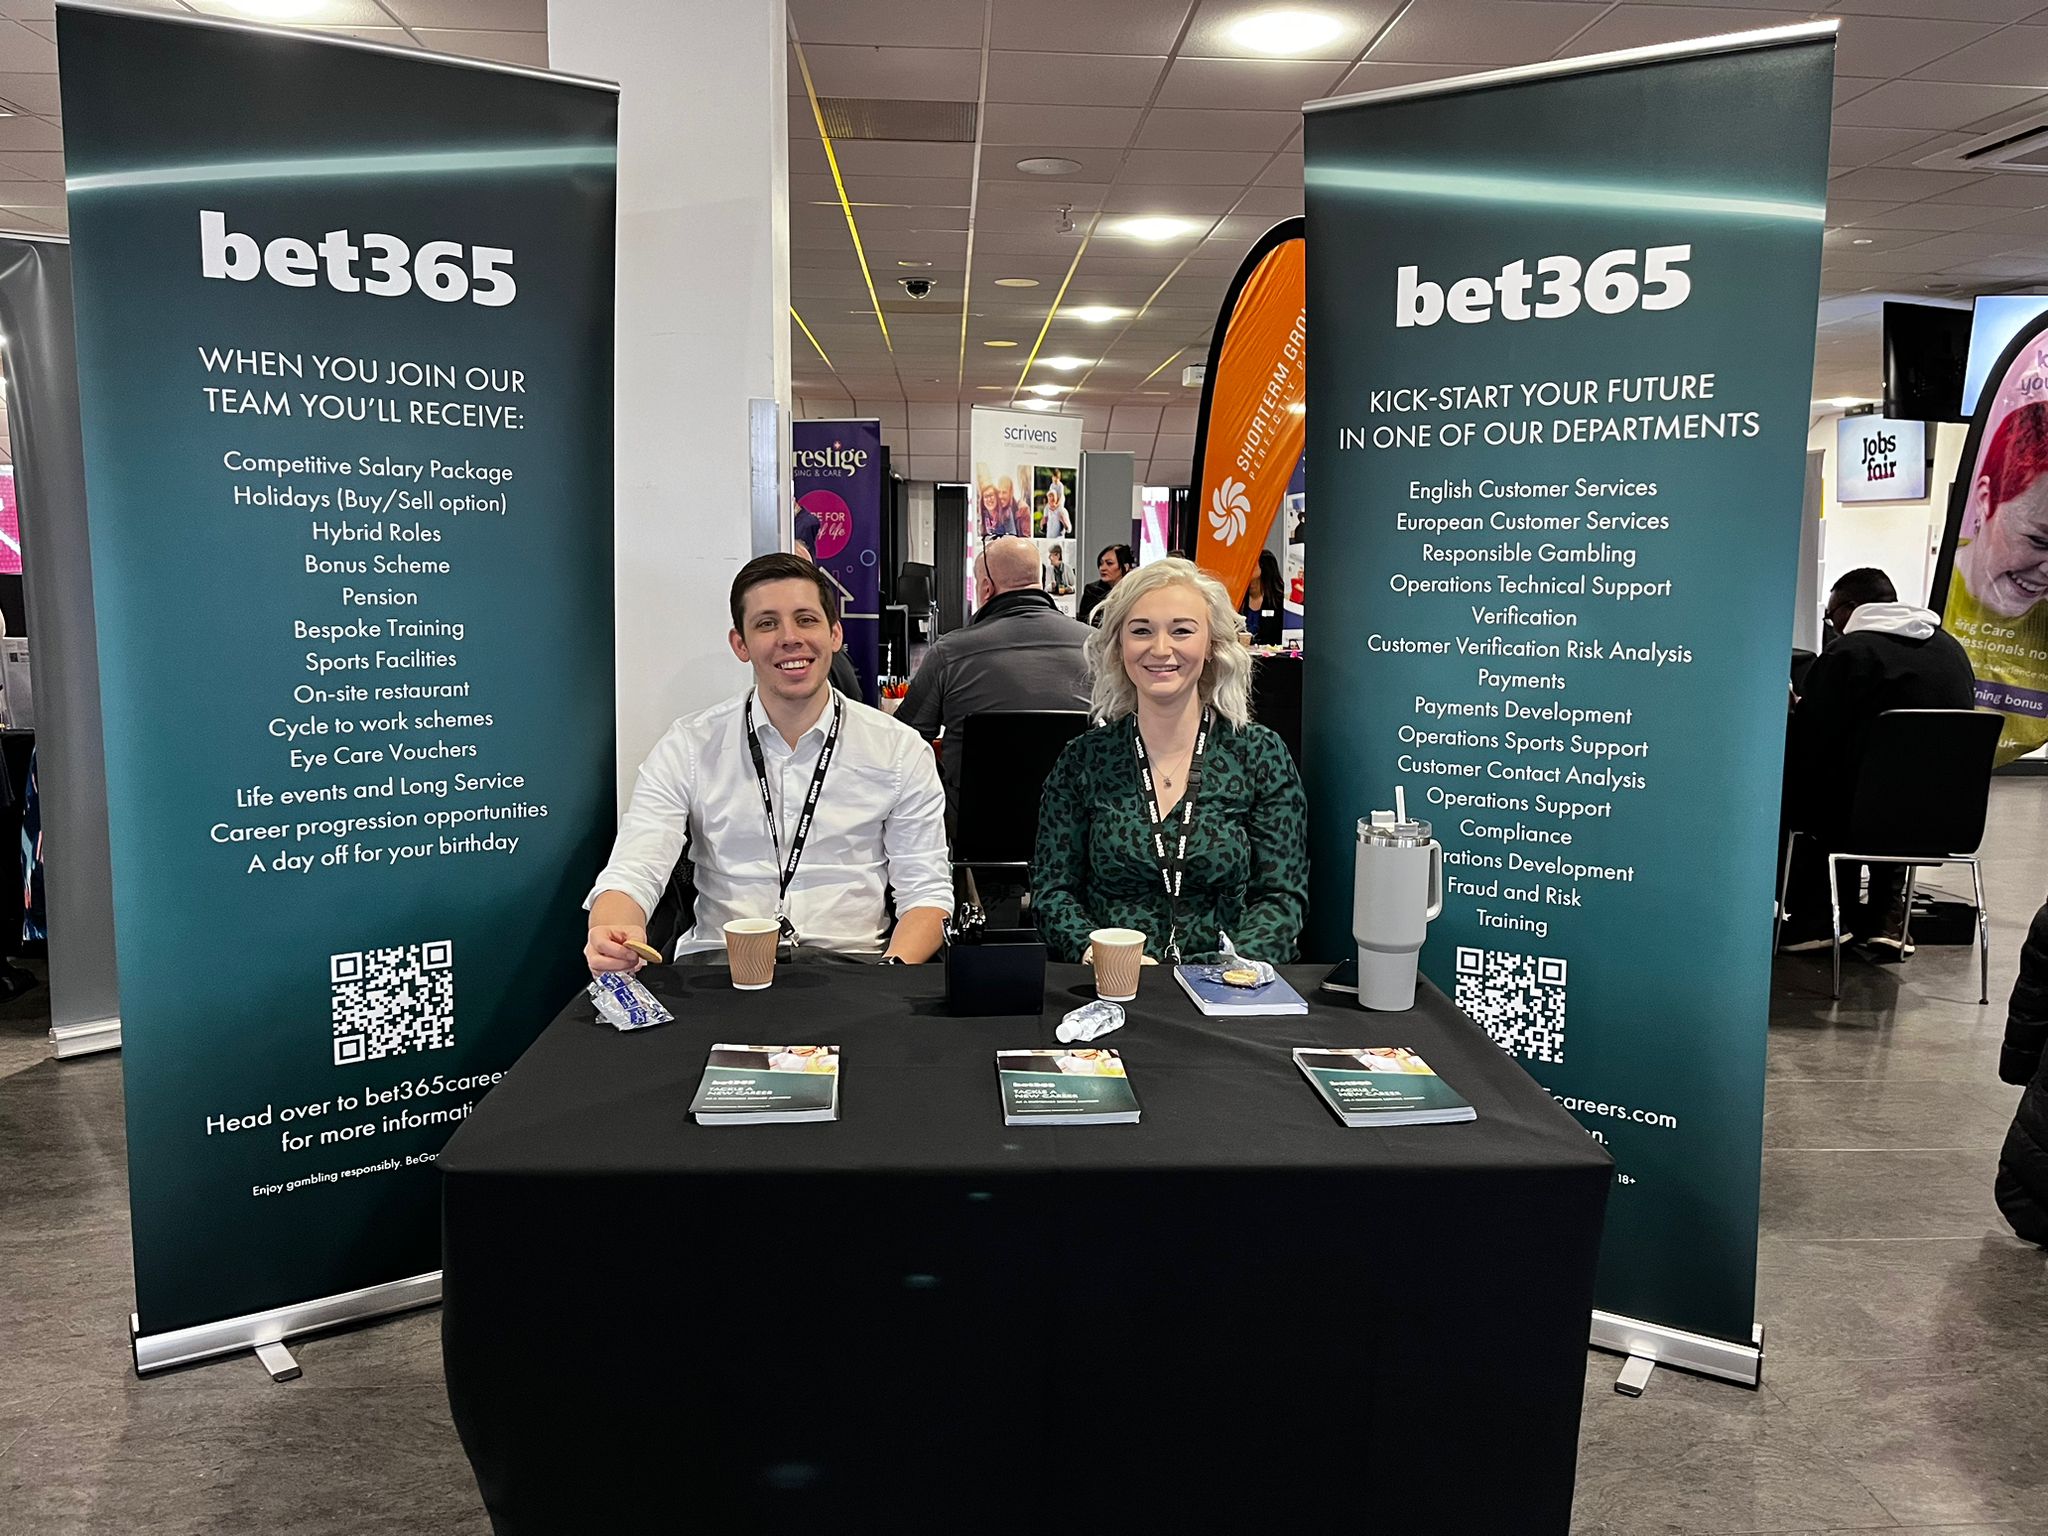 Bet 365 at our event in Stoke-on-Trent